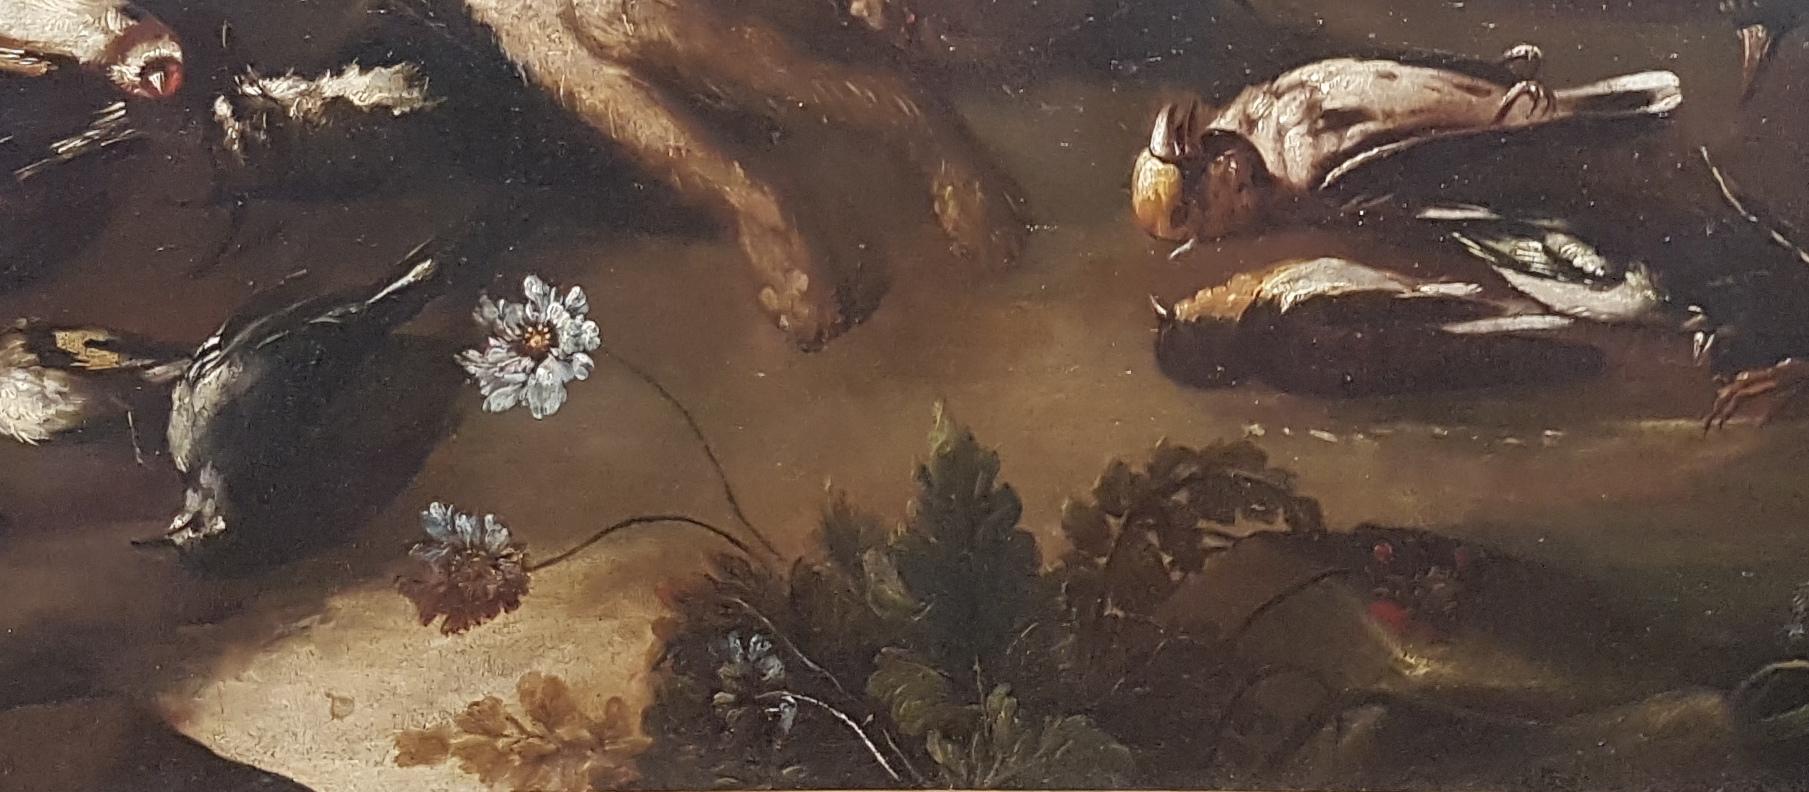 Still Life with Game Bag, Hare and Birds - Oil on Canvas Neapolitan Sch. - 1700 1